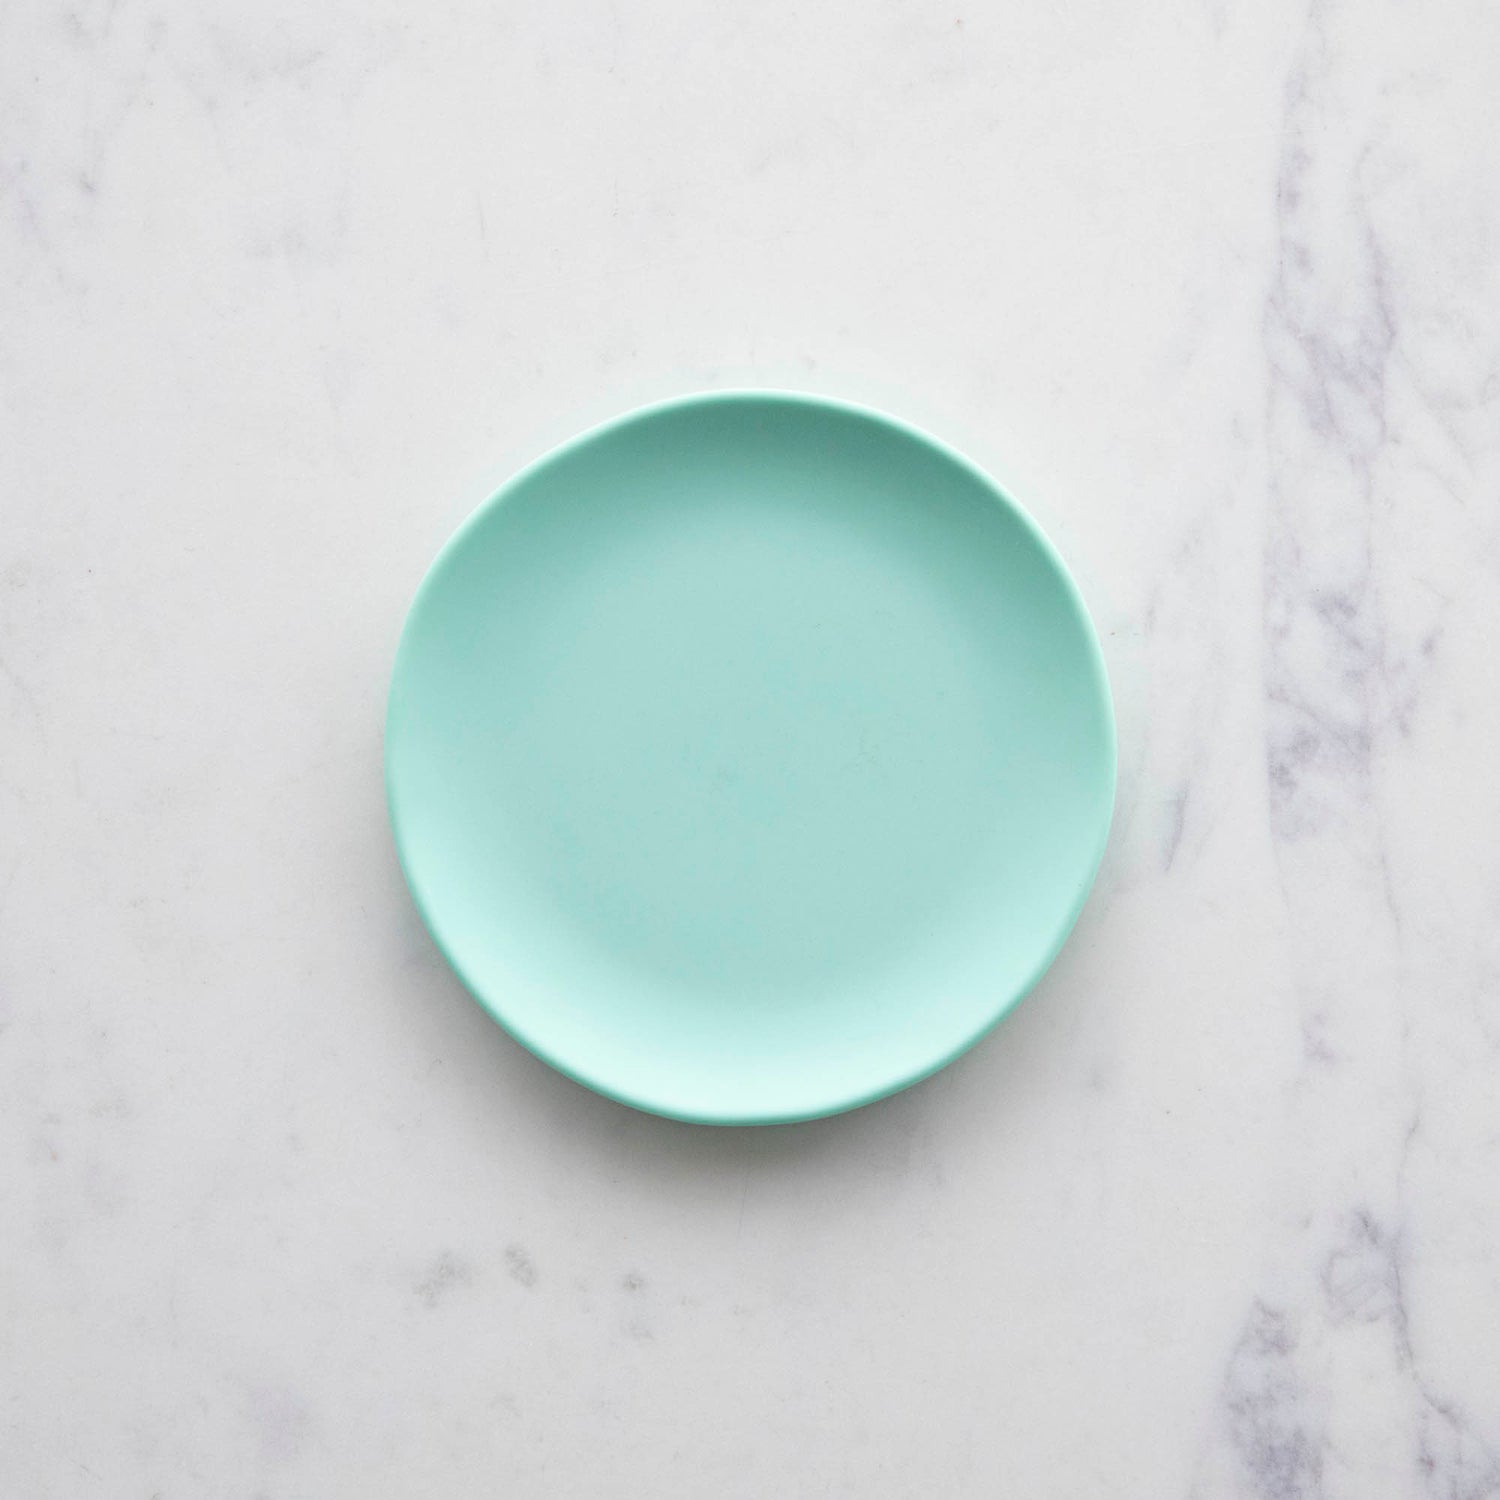 A 6&quot; mint Rainbow Melamine Plate by Glitterville on a marble surface.